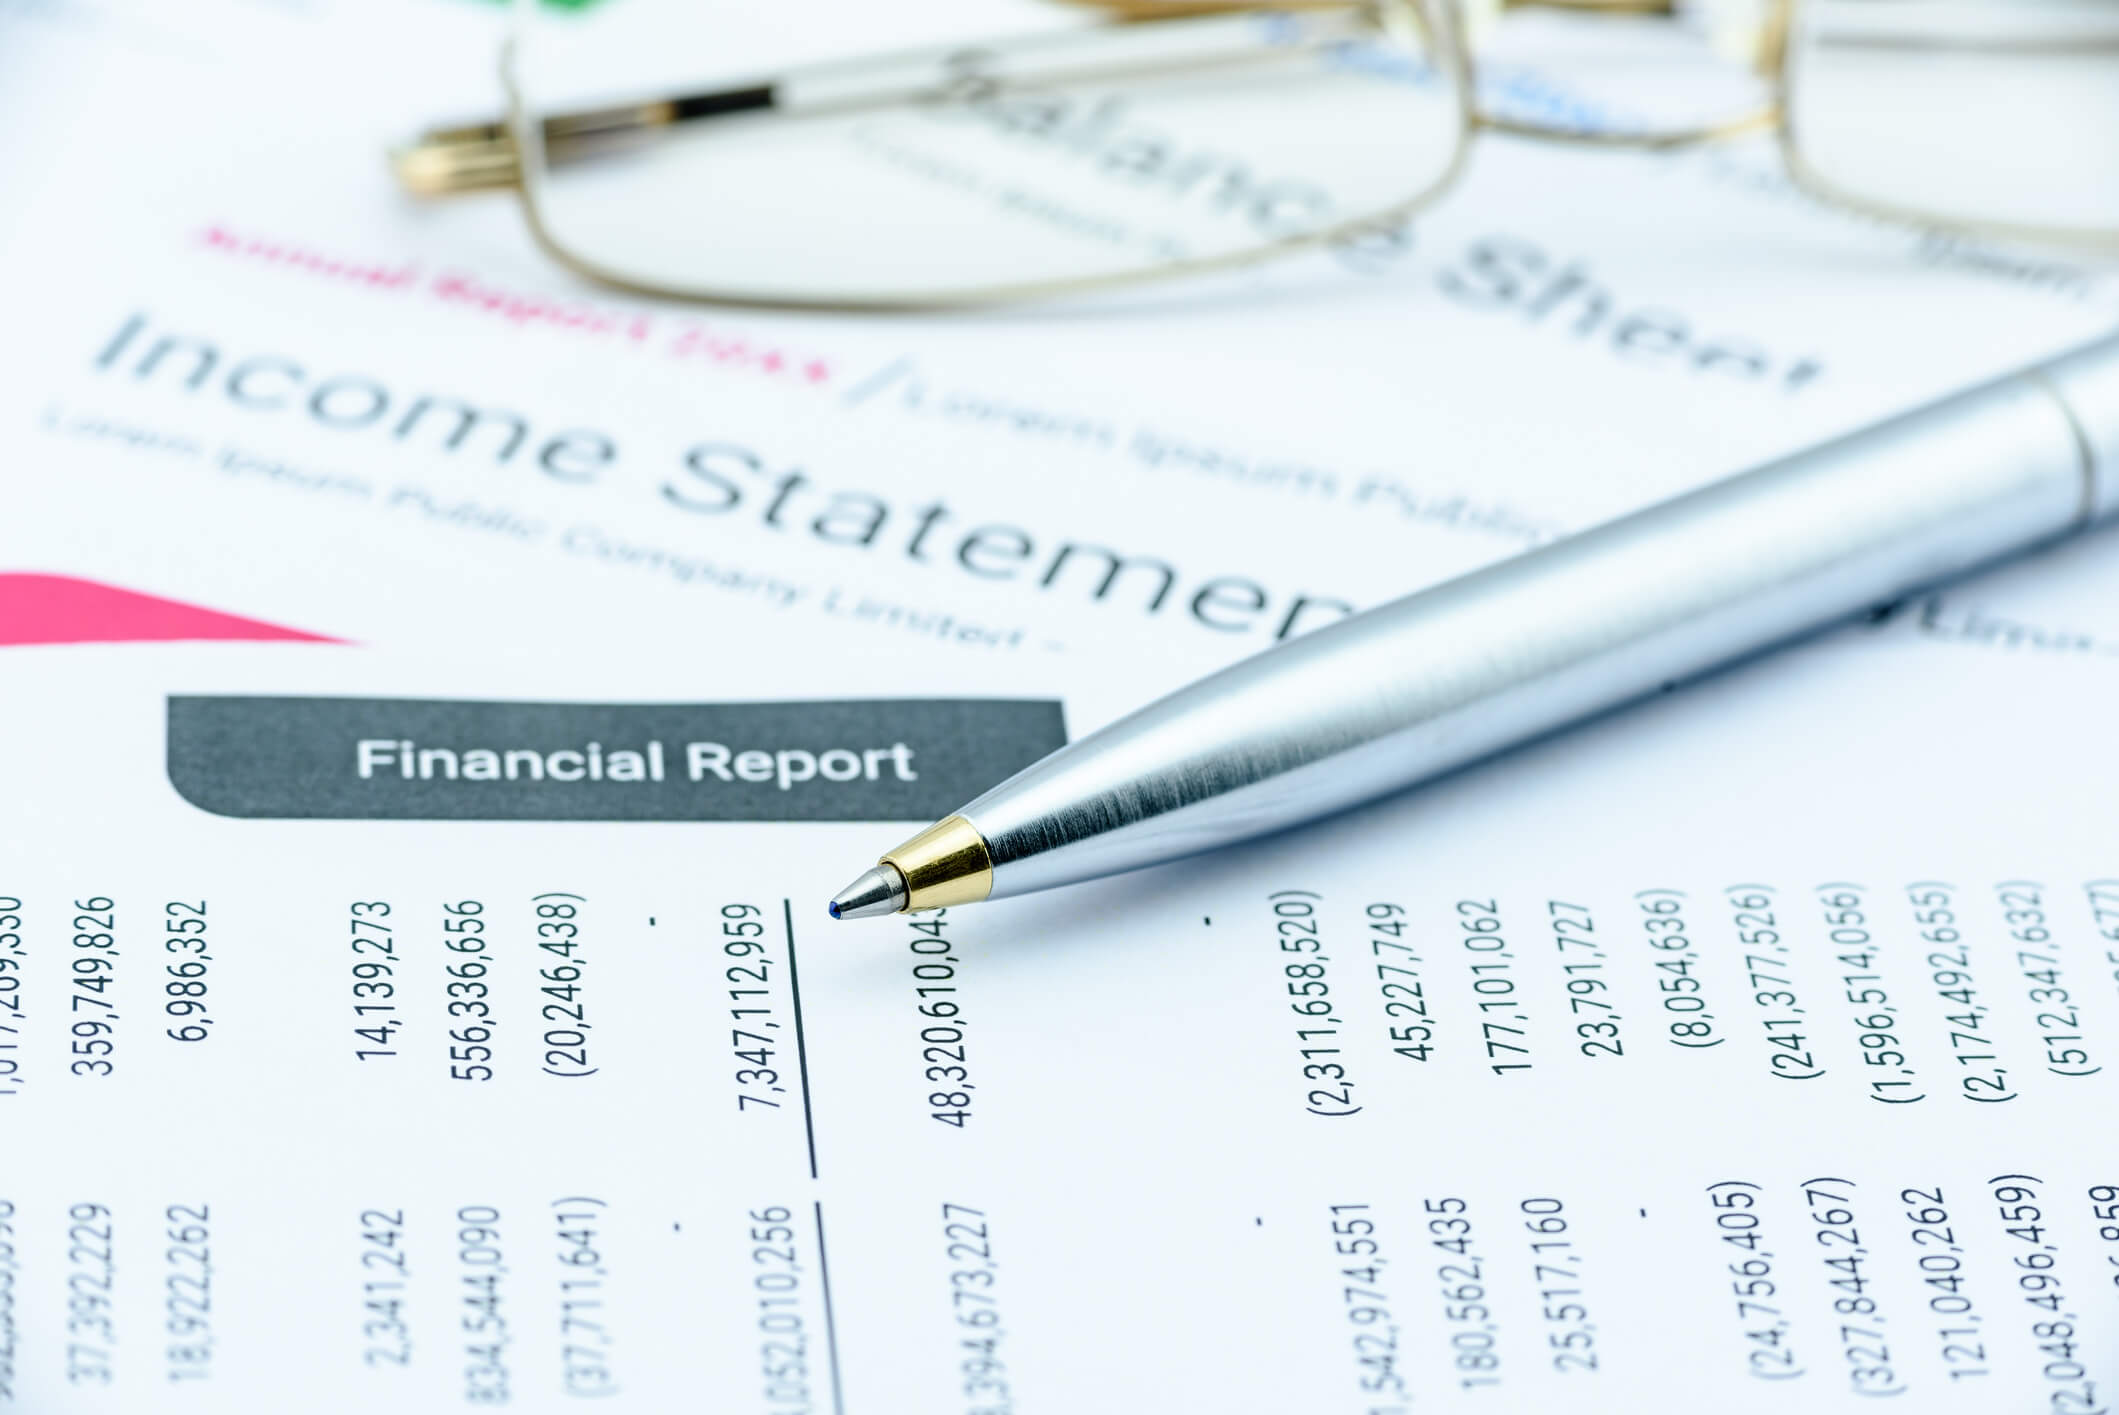 Financial Statement - Complete Controller